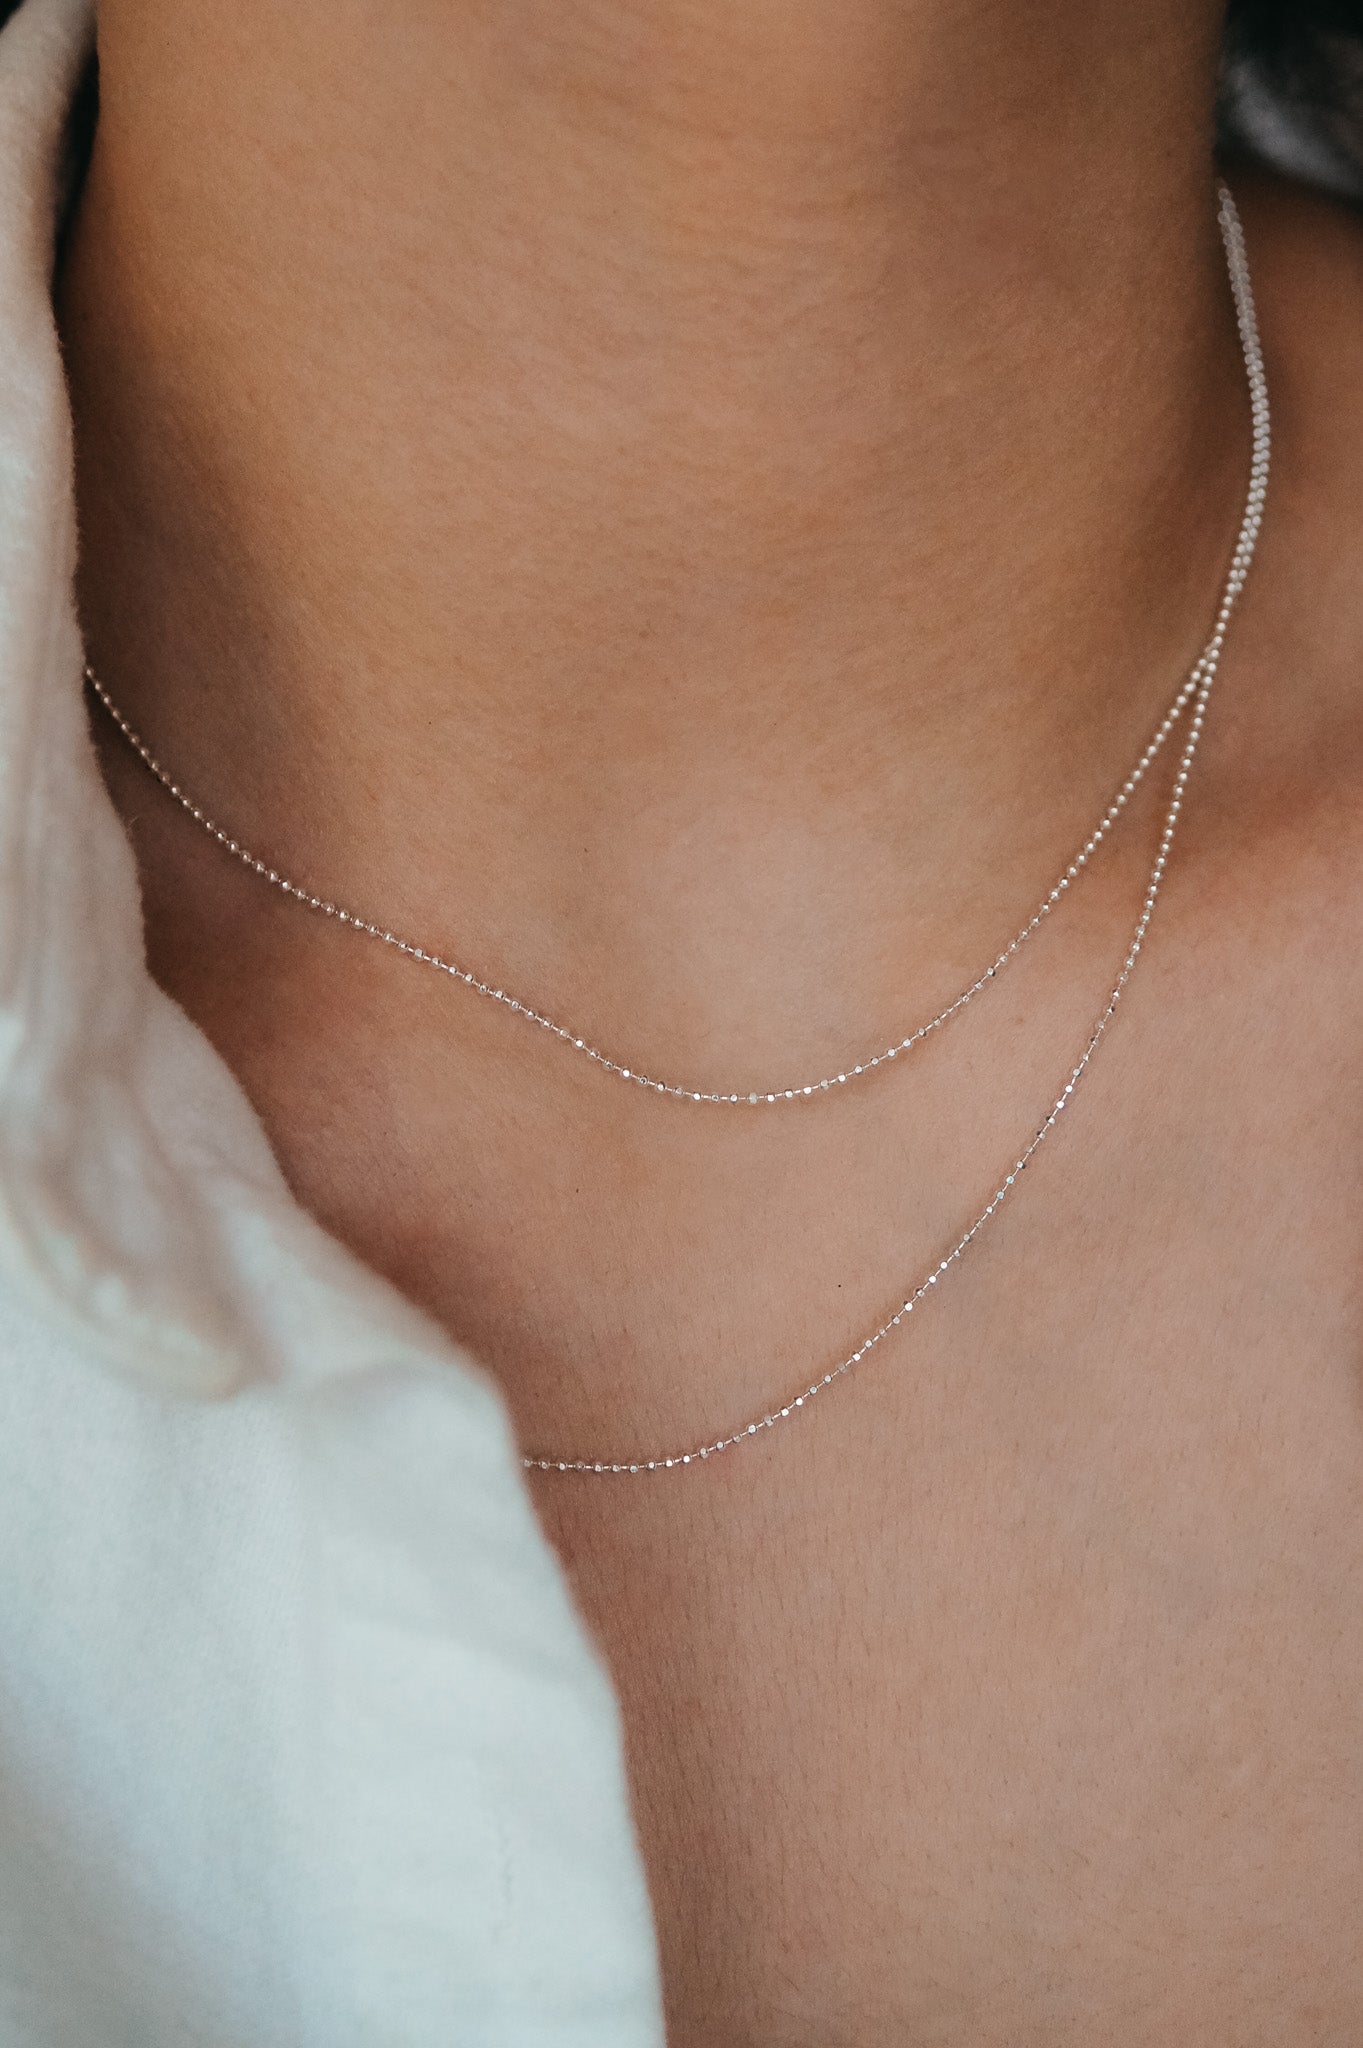 Hammered Silver Disc Necklace, Sterling Silver Necklace, Silver Disc  Necklace, Simple Silver Necklace, Delicate Silver Necklace -  Canada